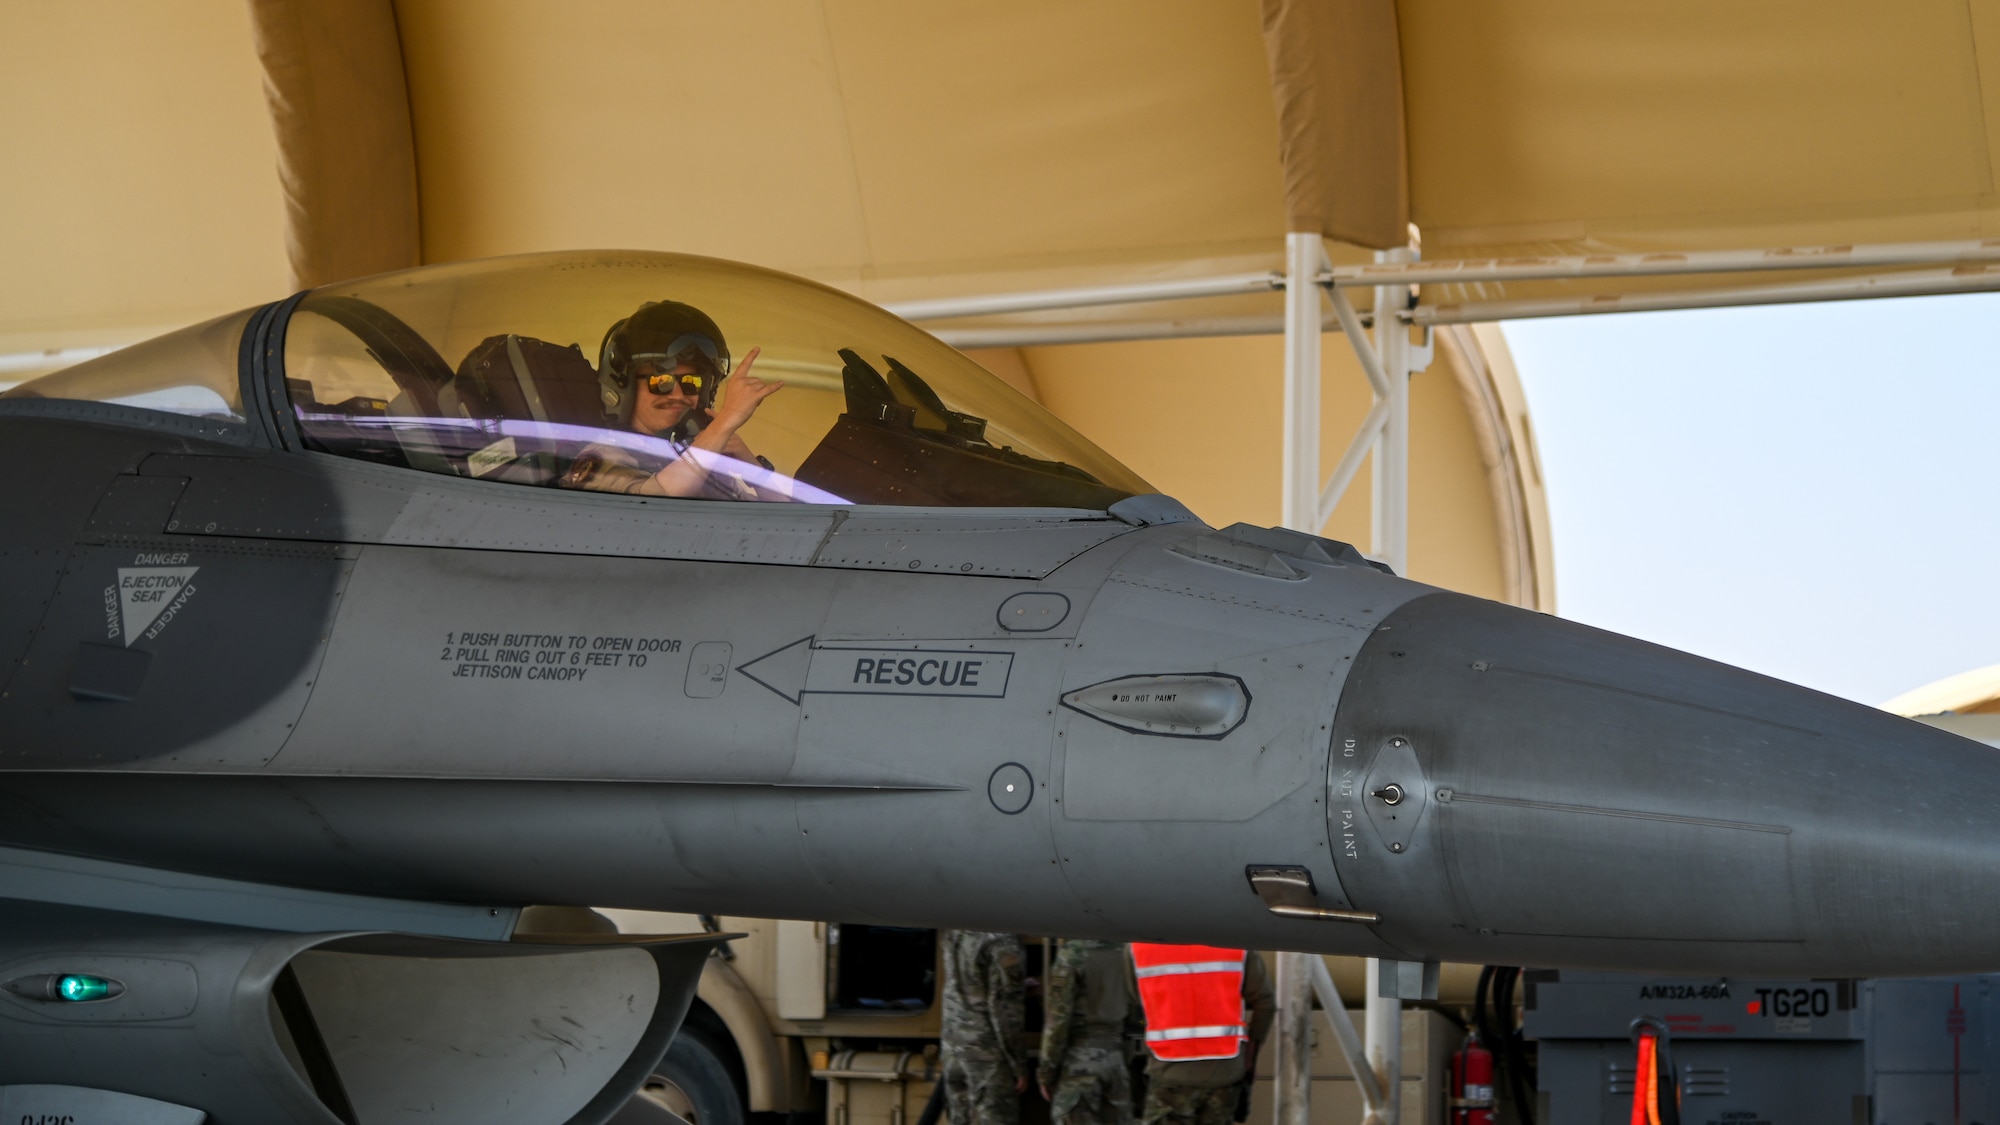 First Lt. Alexander Abbott, 176th Expeditionary Fighter Squadron pilot, poses for a photo during an Integrated Combat Turn at Prince Sultan Air Base, Kingdom of Saudi Arabia, Nov. 18, 2021. Performing ICTs allows the aircrew to spend less time on the ground and increases the time they can fly supporting operations. (U.S. Air Force photo by Staff Sgt. Christina Graves)